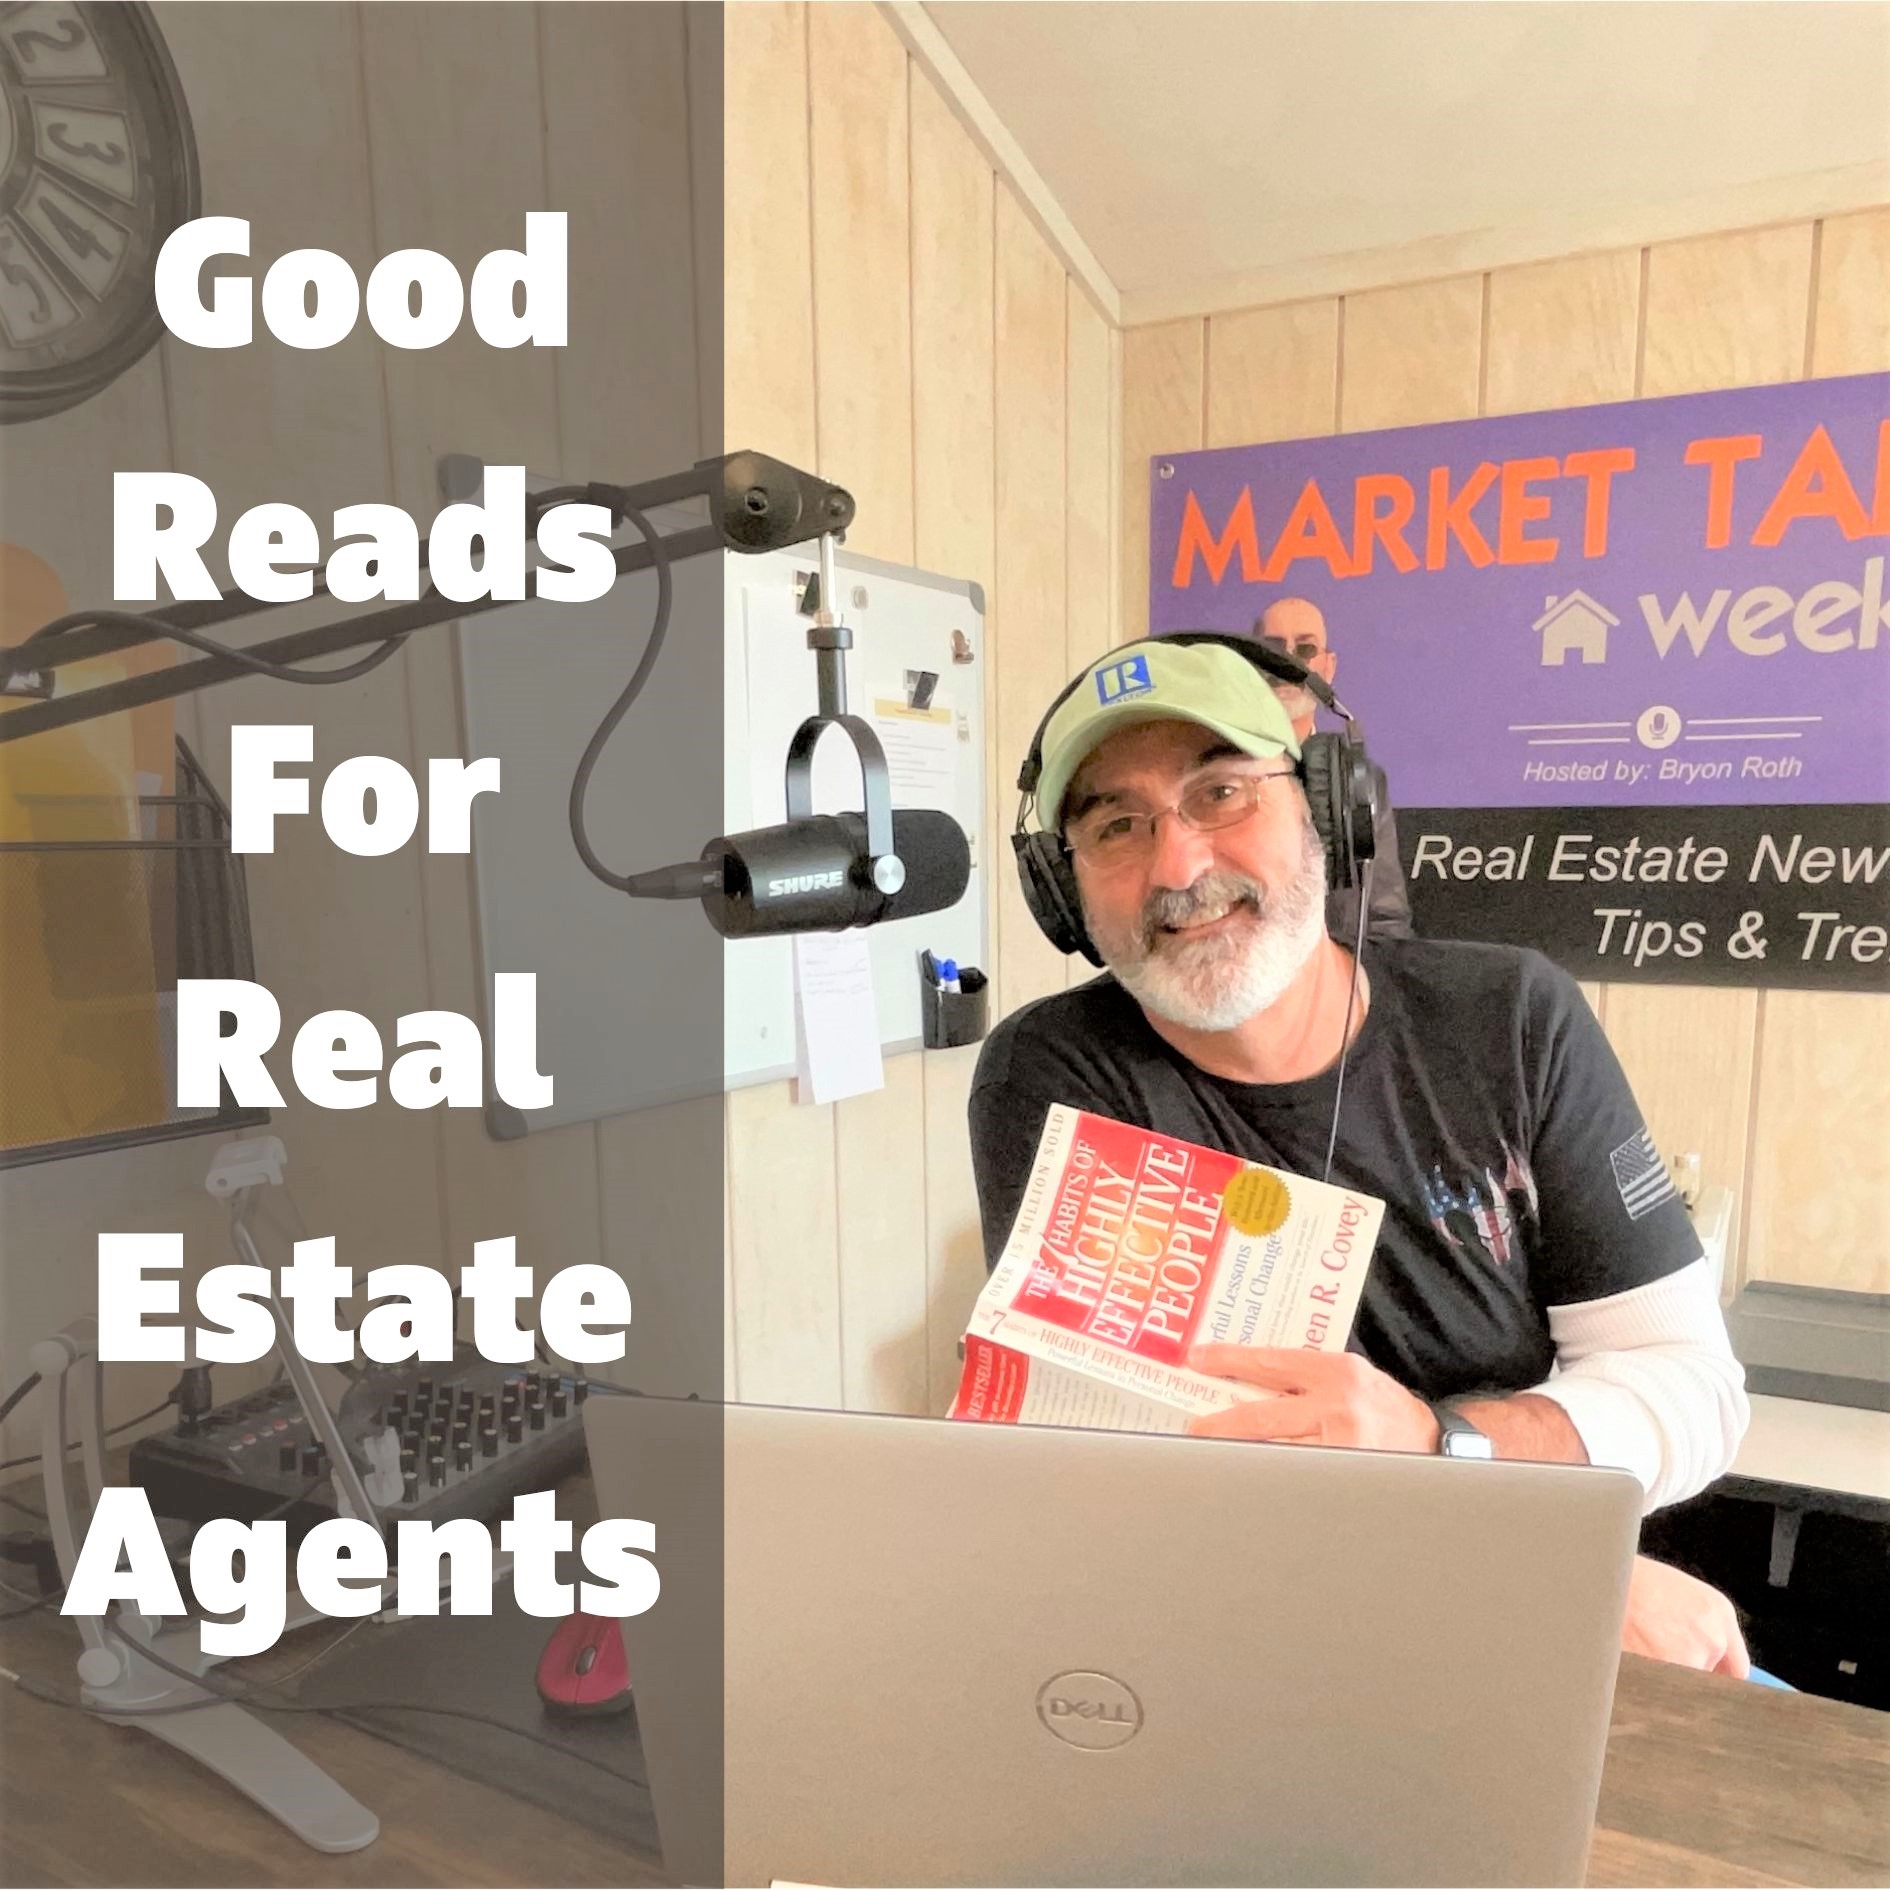 Good Reads For Real Estate Agents